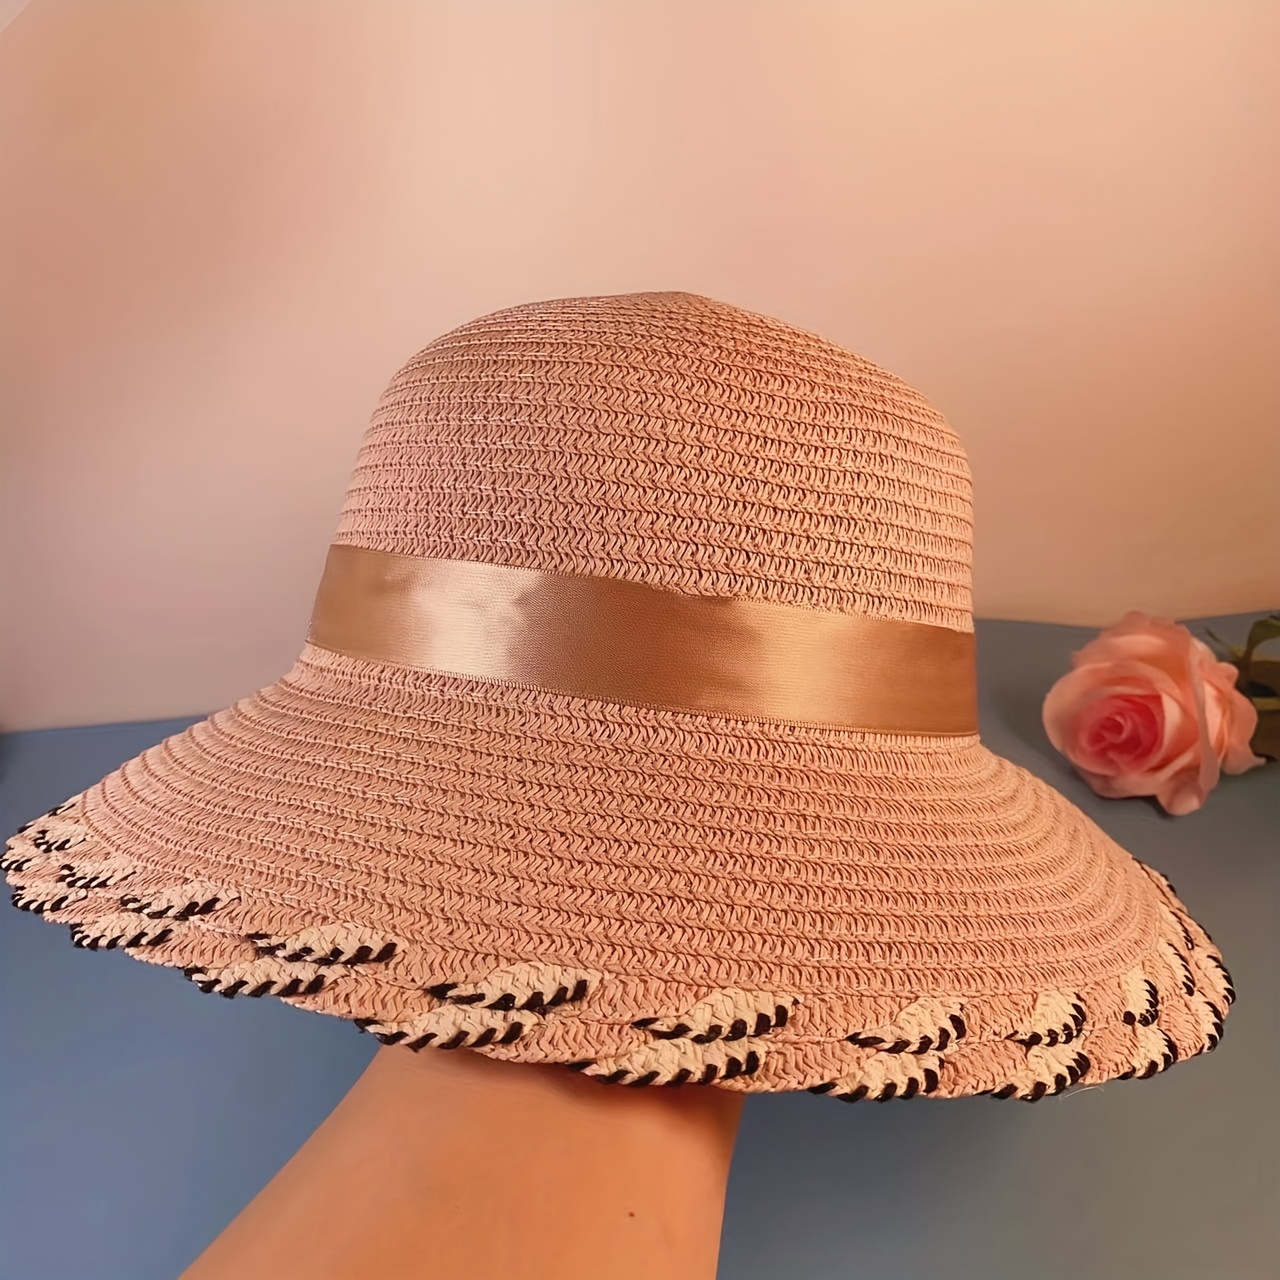 Summer Straw Hat With Faux Pearl Bow Decor, Women's Elegant Sun Hat, Wide Brim Sun Protection Beach Fisherman Hat, For Vacation